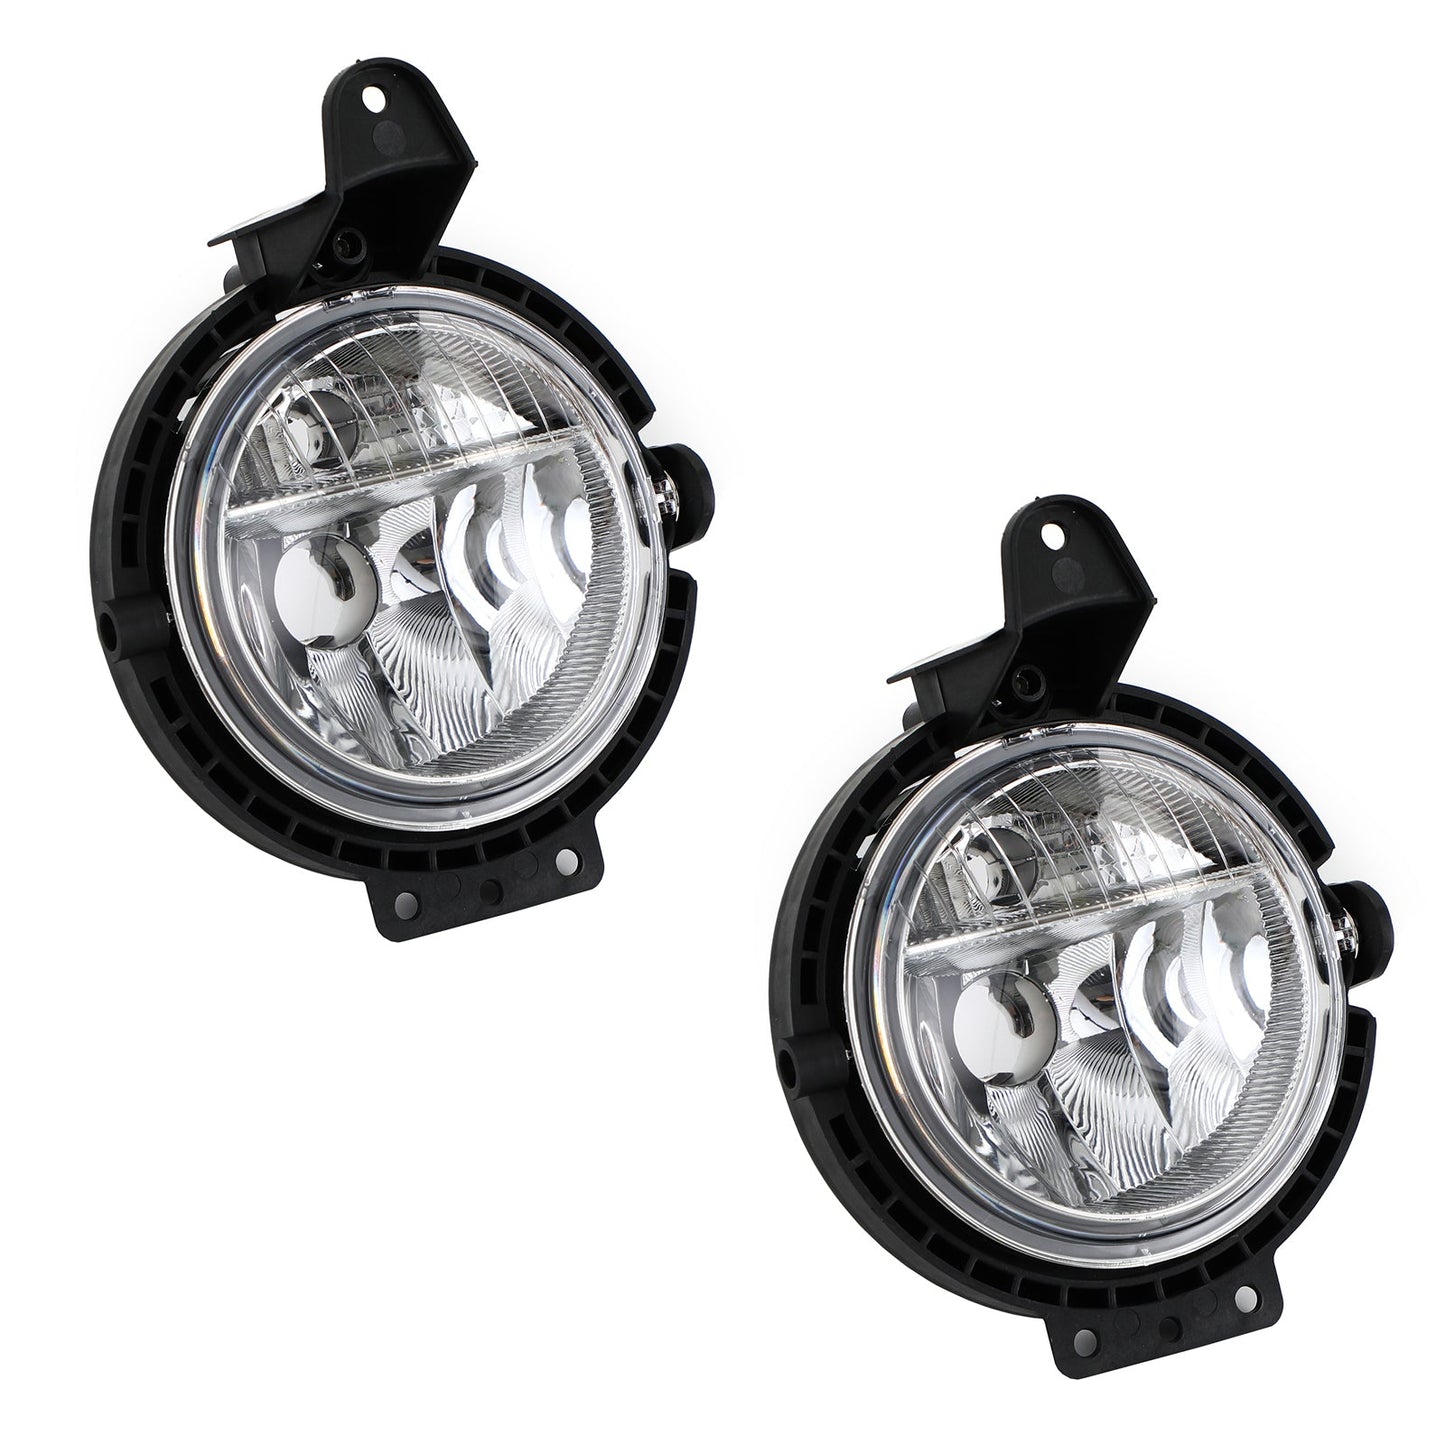 Pair Fog Lights Front Left and Right For Mini R55 R56 R57 R58 Cooper 2007-2015